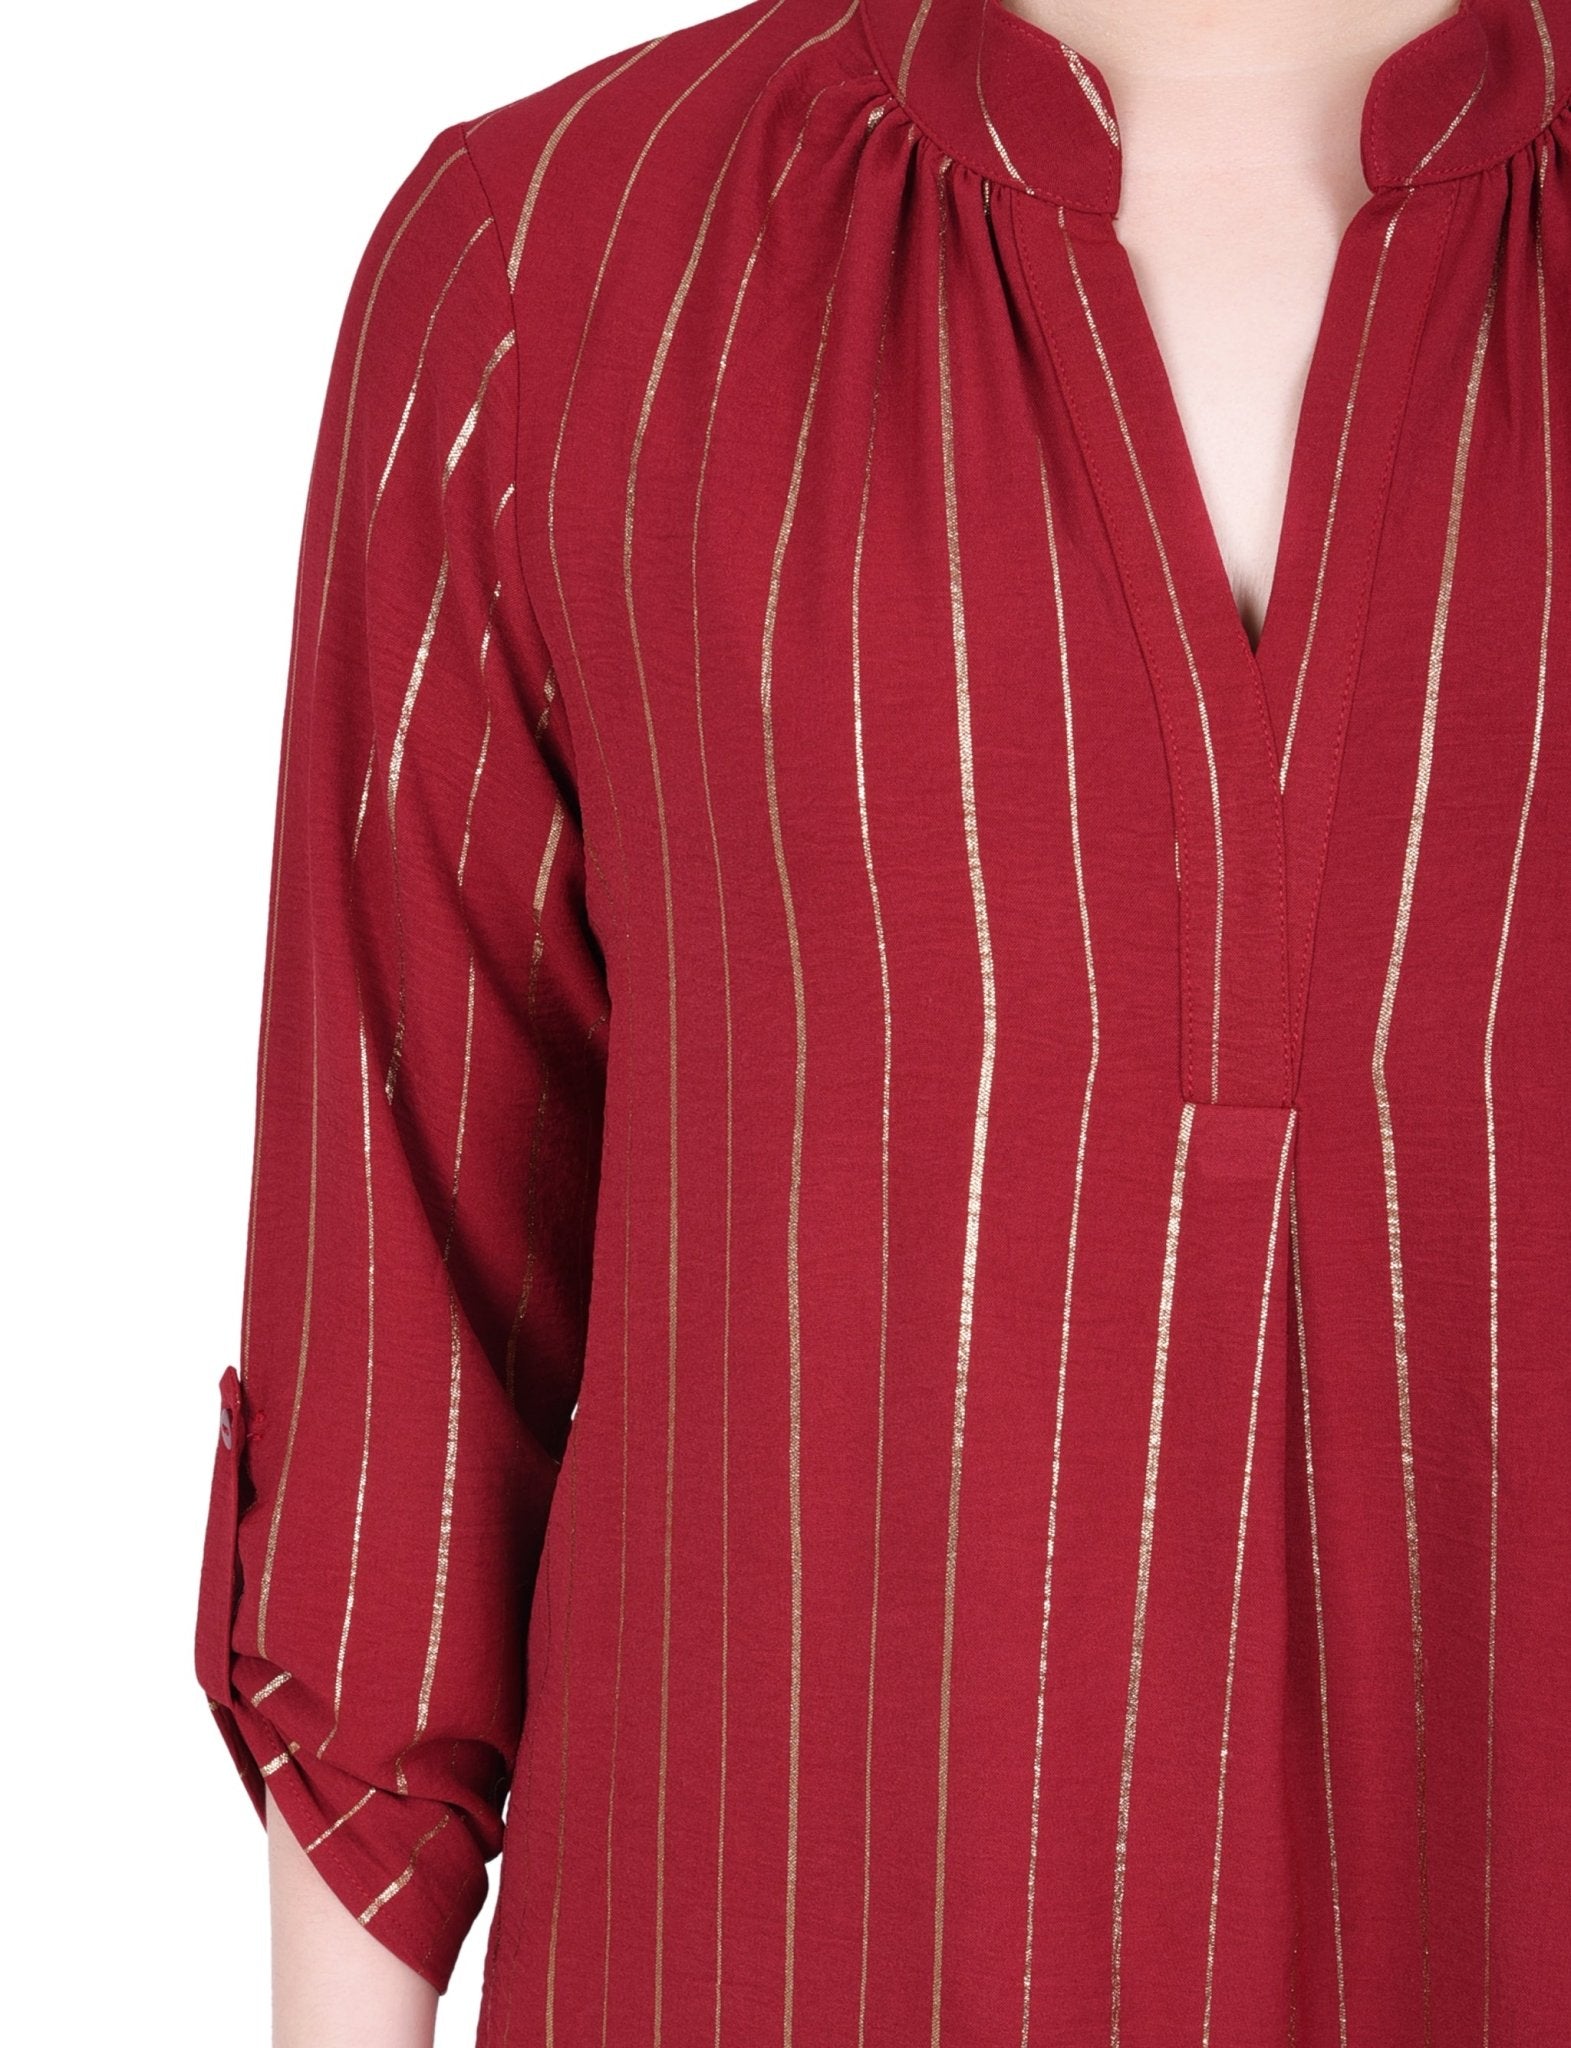 NY Collection Long Sleeve Foil Striped Blouse - Petite - DressbarnShirts & Blouses